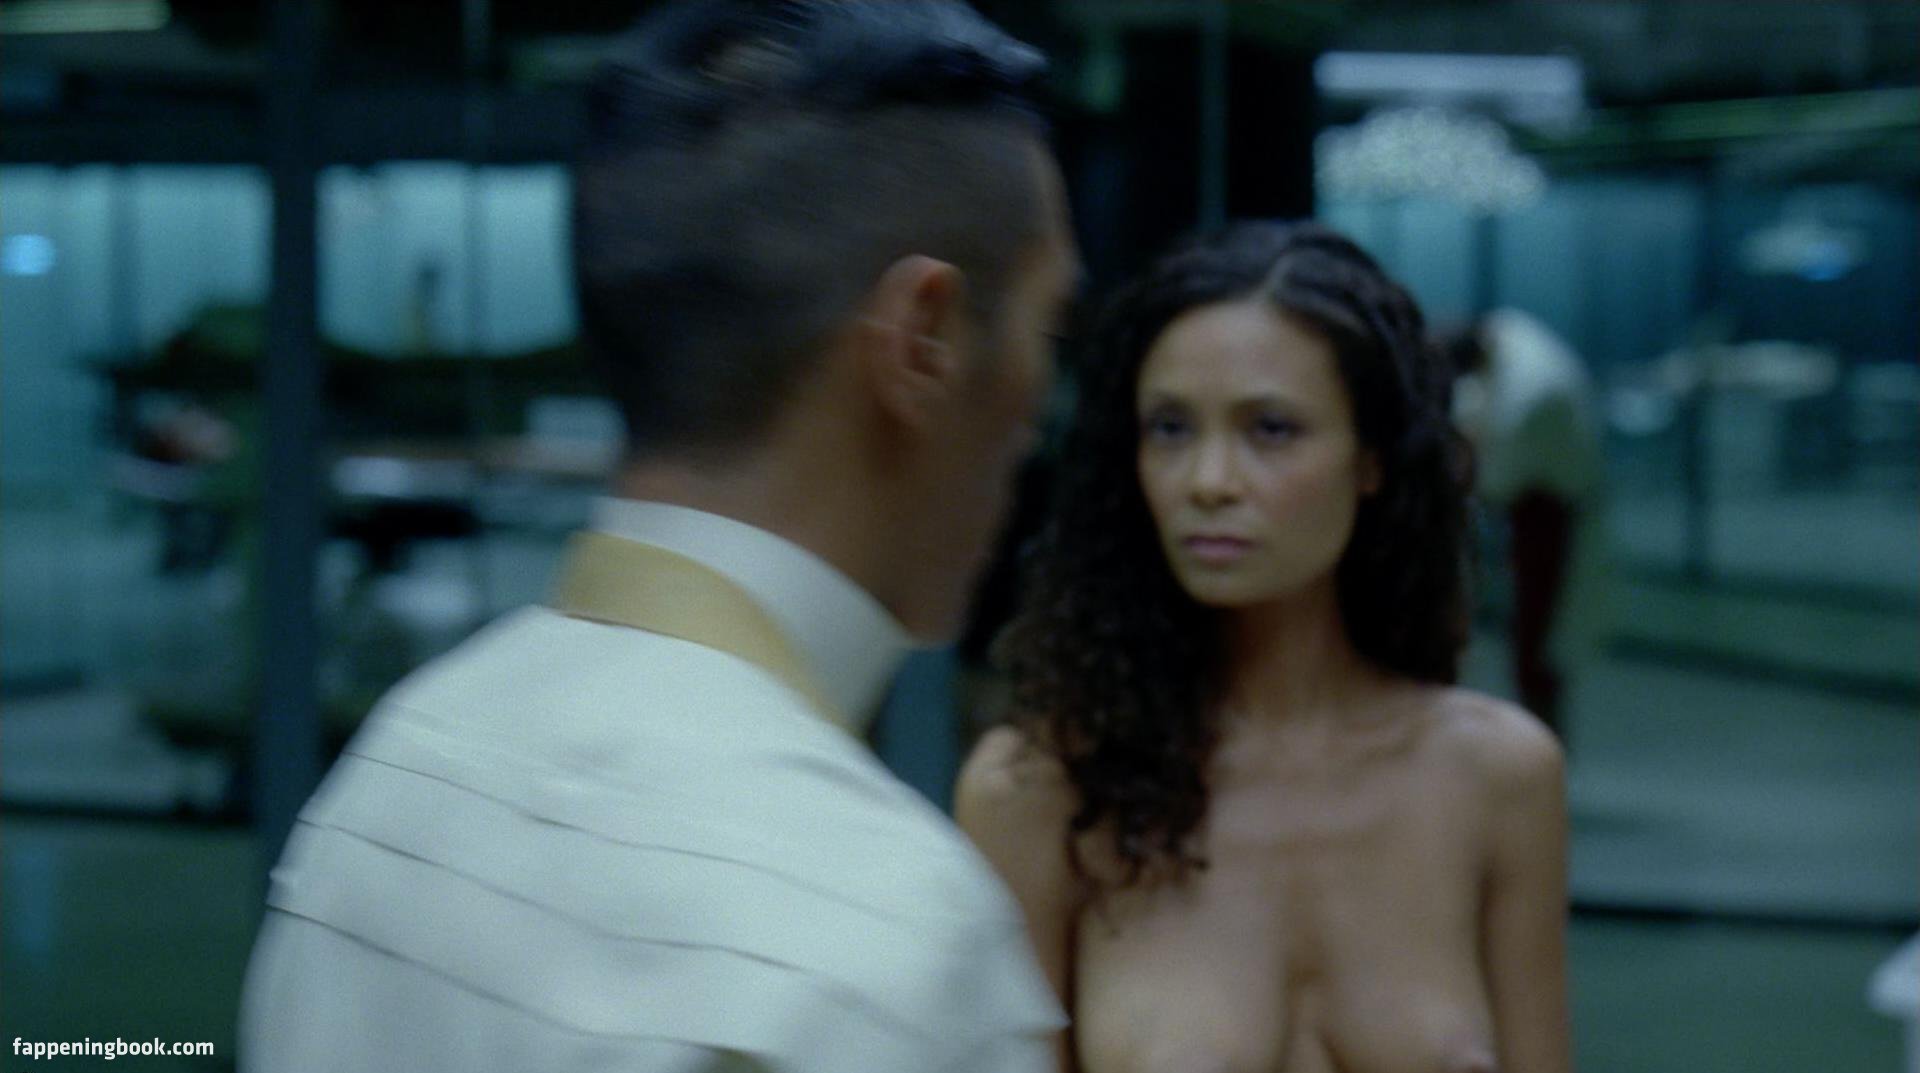 Thandie newton nude pictures